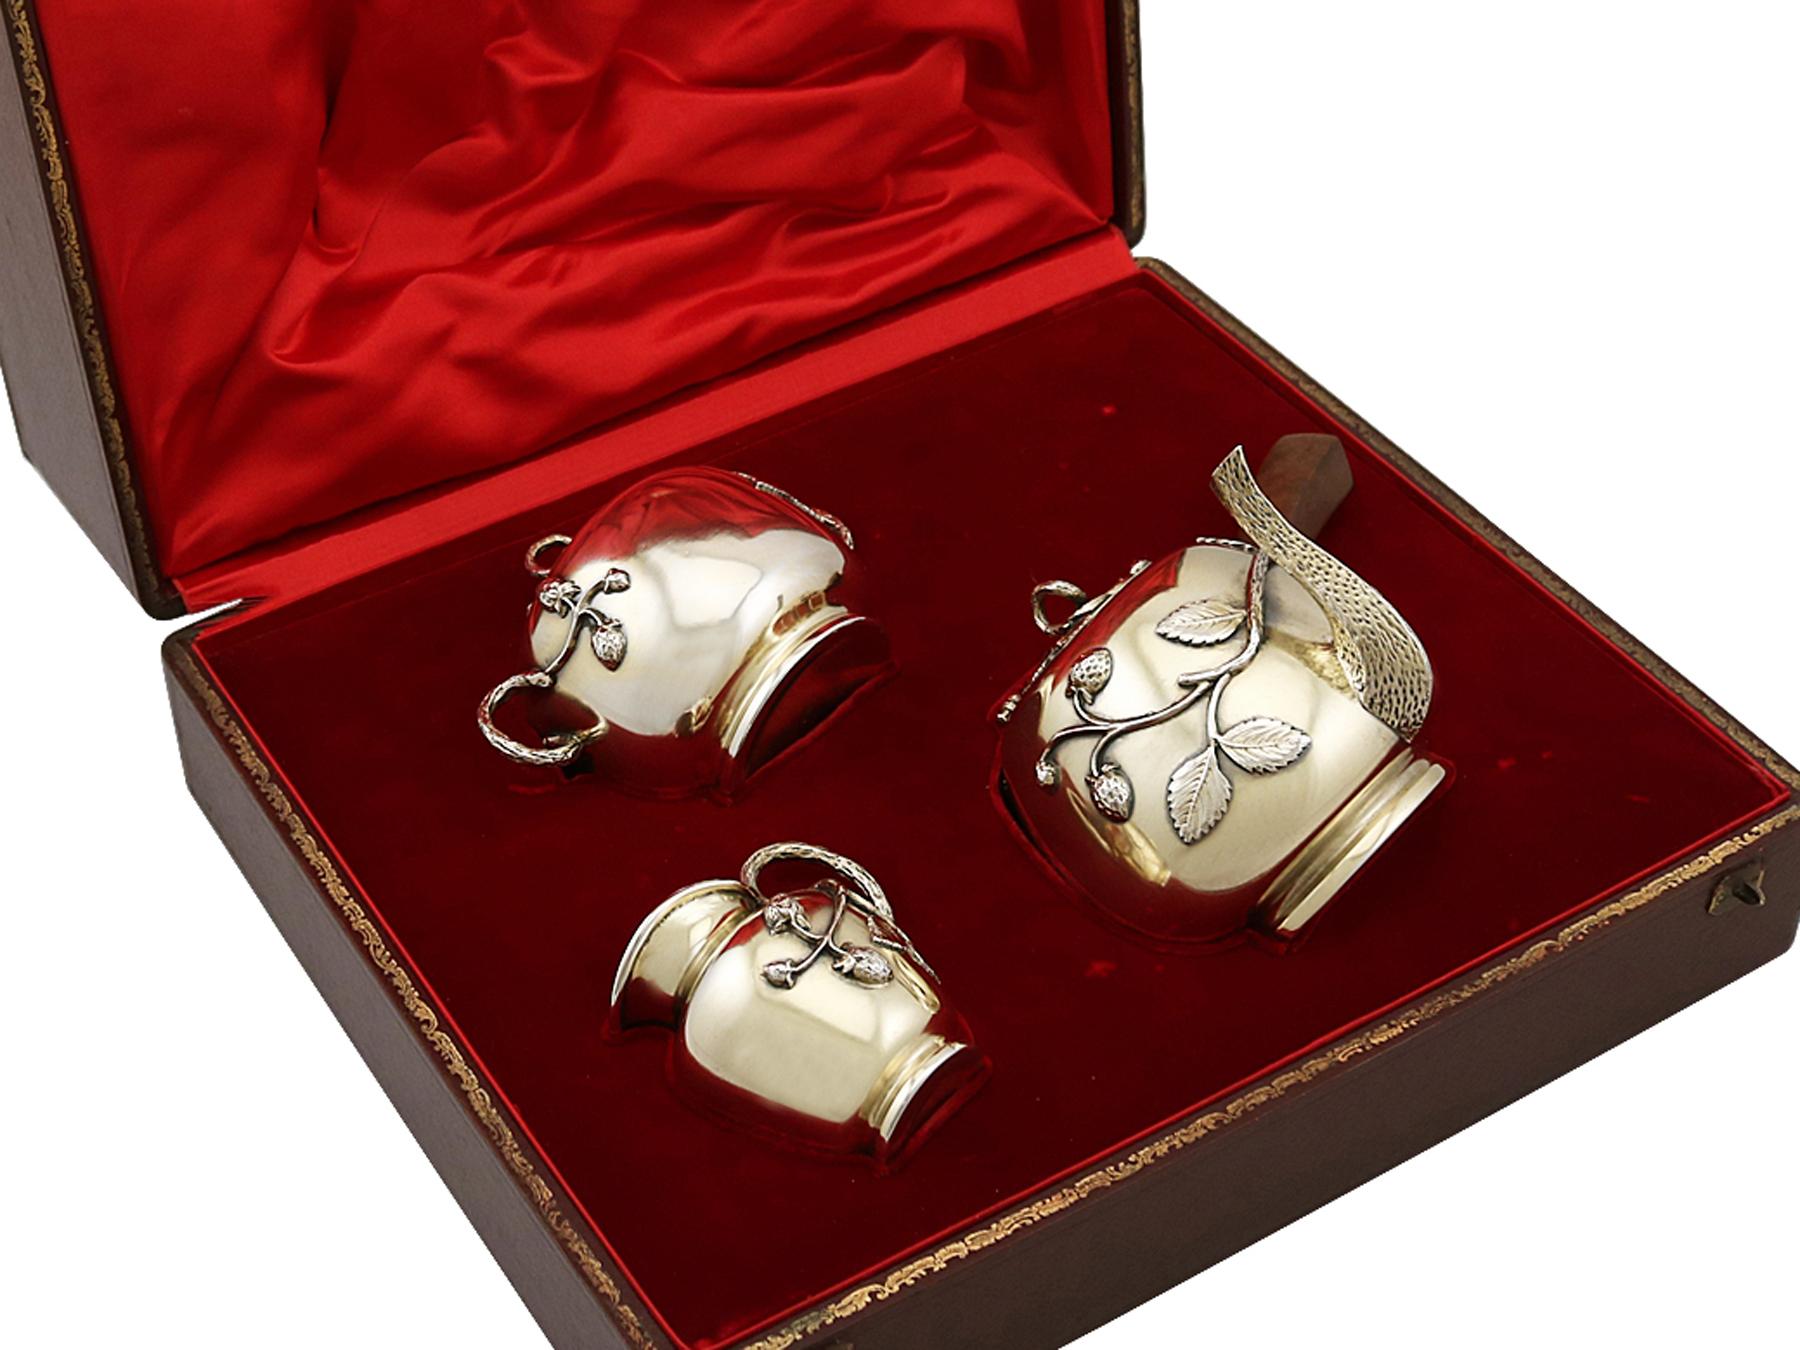 A exceptional, fine and impressive antique French 950 standard silver three-piece tea set; an addition to our silver teaware collection.

This exceptional antique French silver tea set consists of a teapot, cream jug and covered sugar bowl.

Each